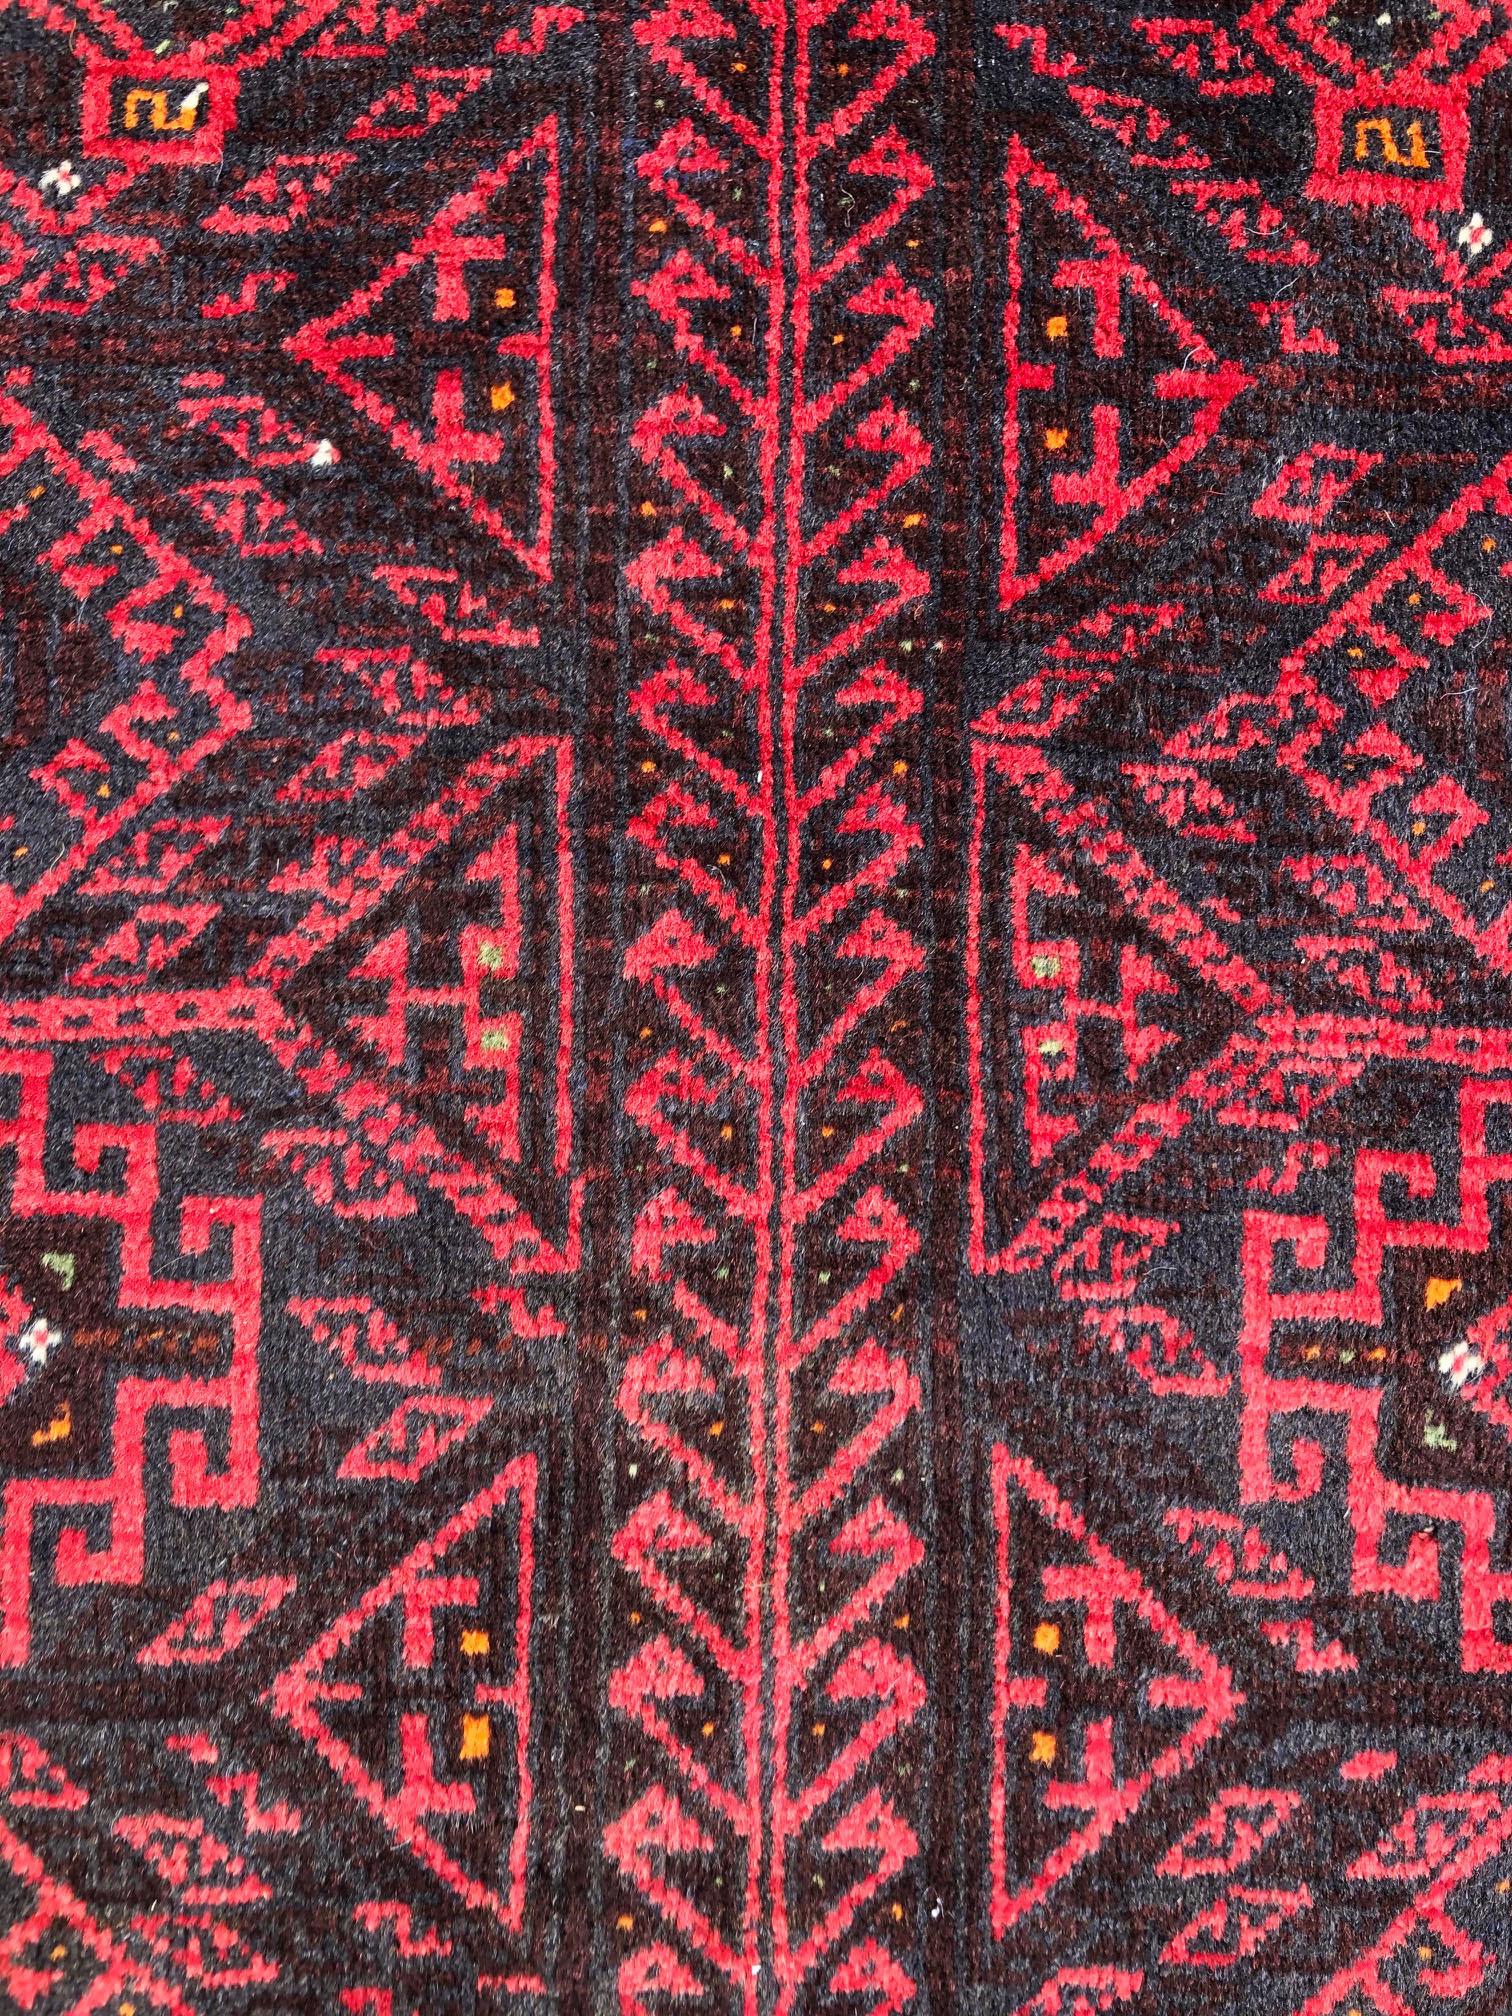 Hand-Knotted Authentic Persian Hand Knotted Geometric All-Over Red Black Baluchi Rug, 1960 For Sale